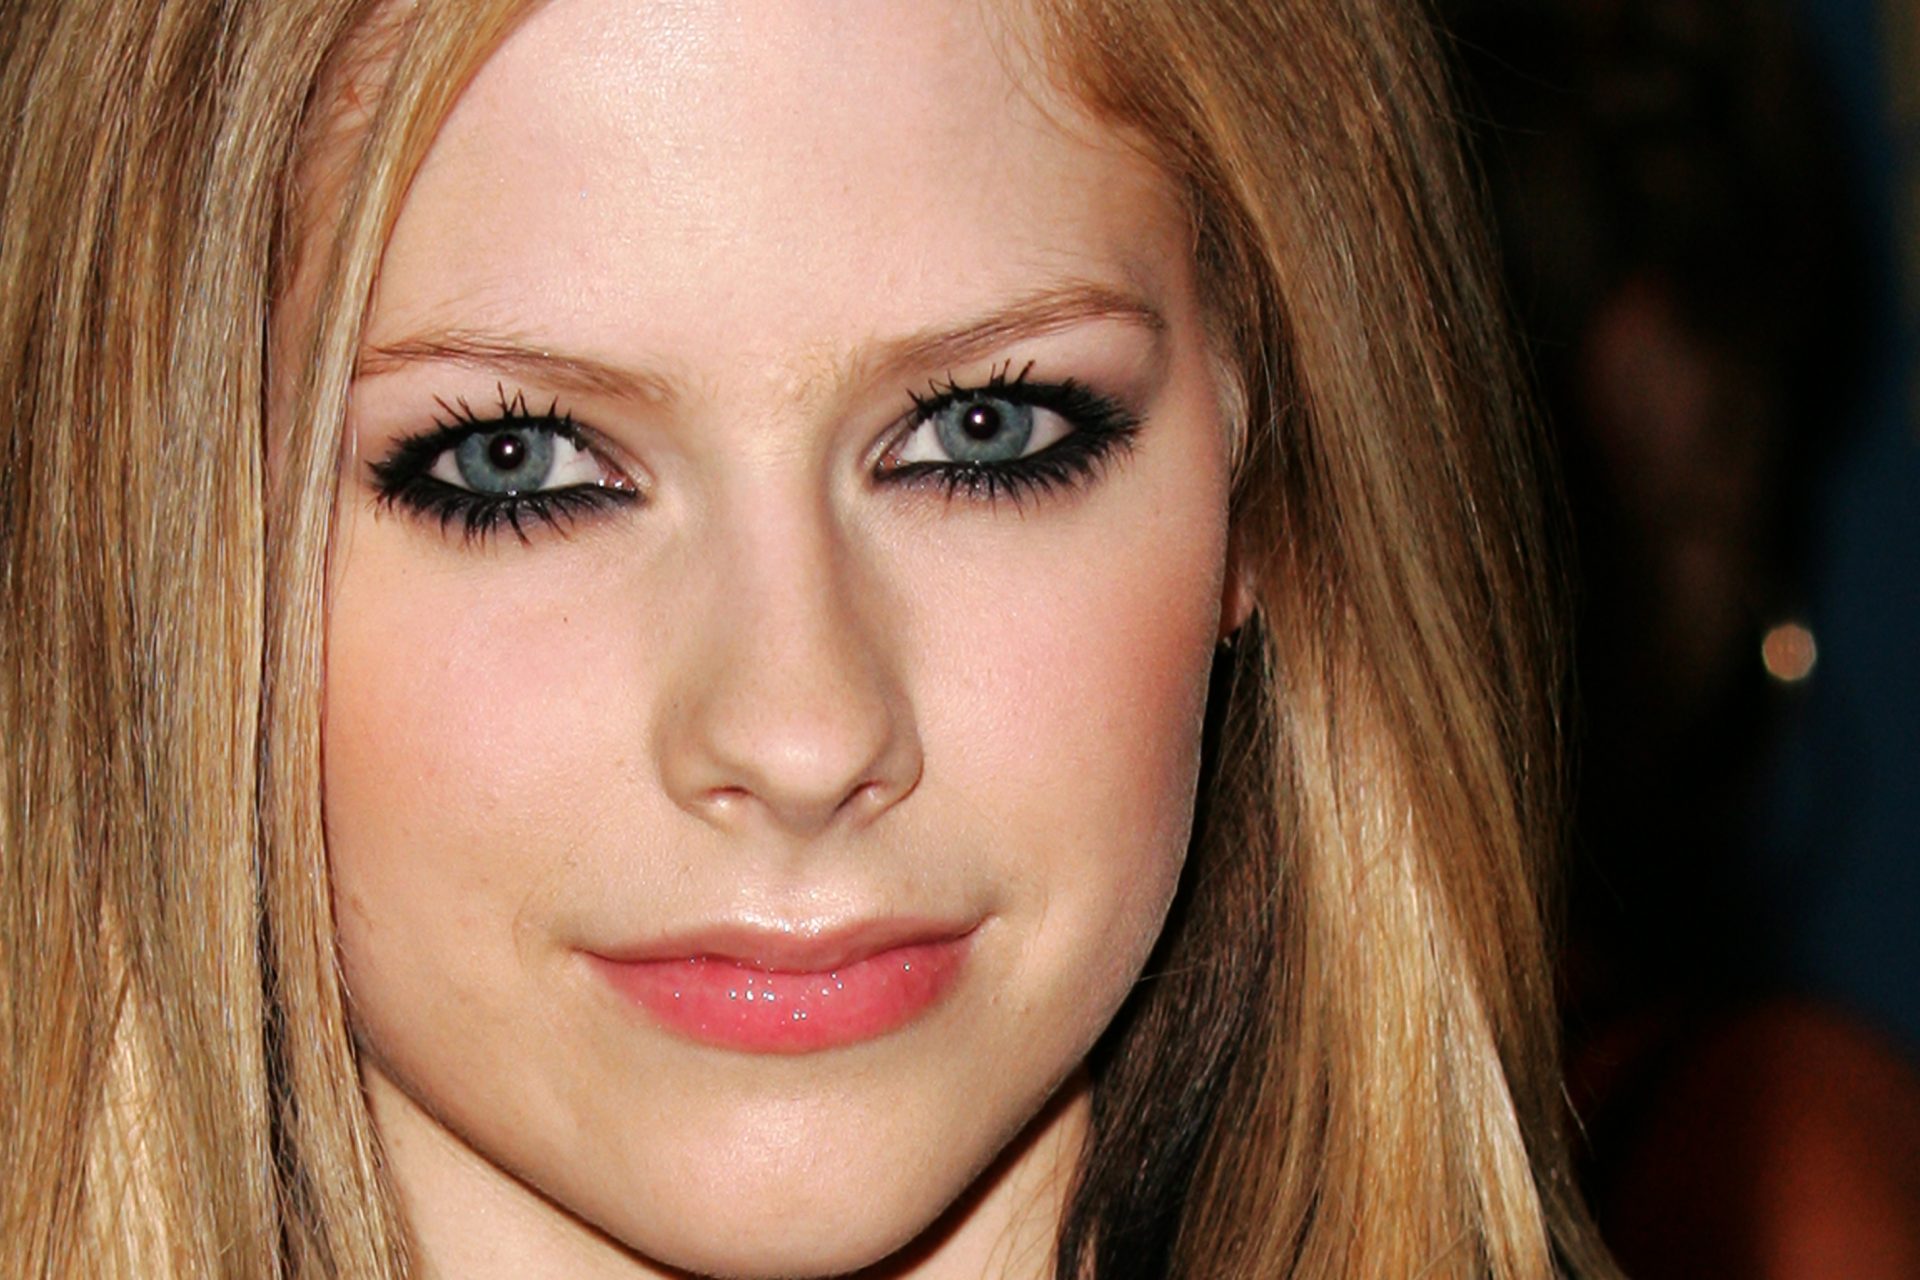 The wild theory about Avril Lavigne's (fake) death in 2003